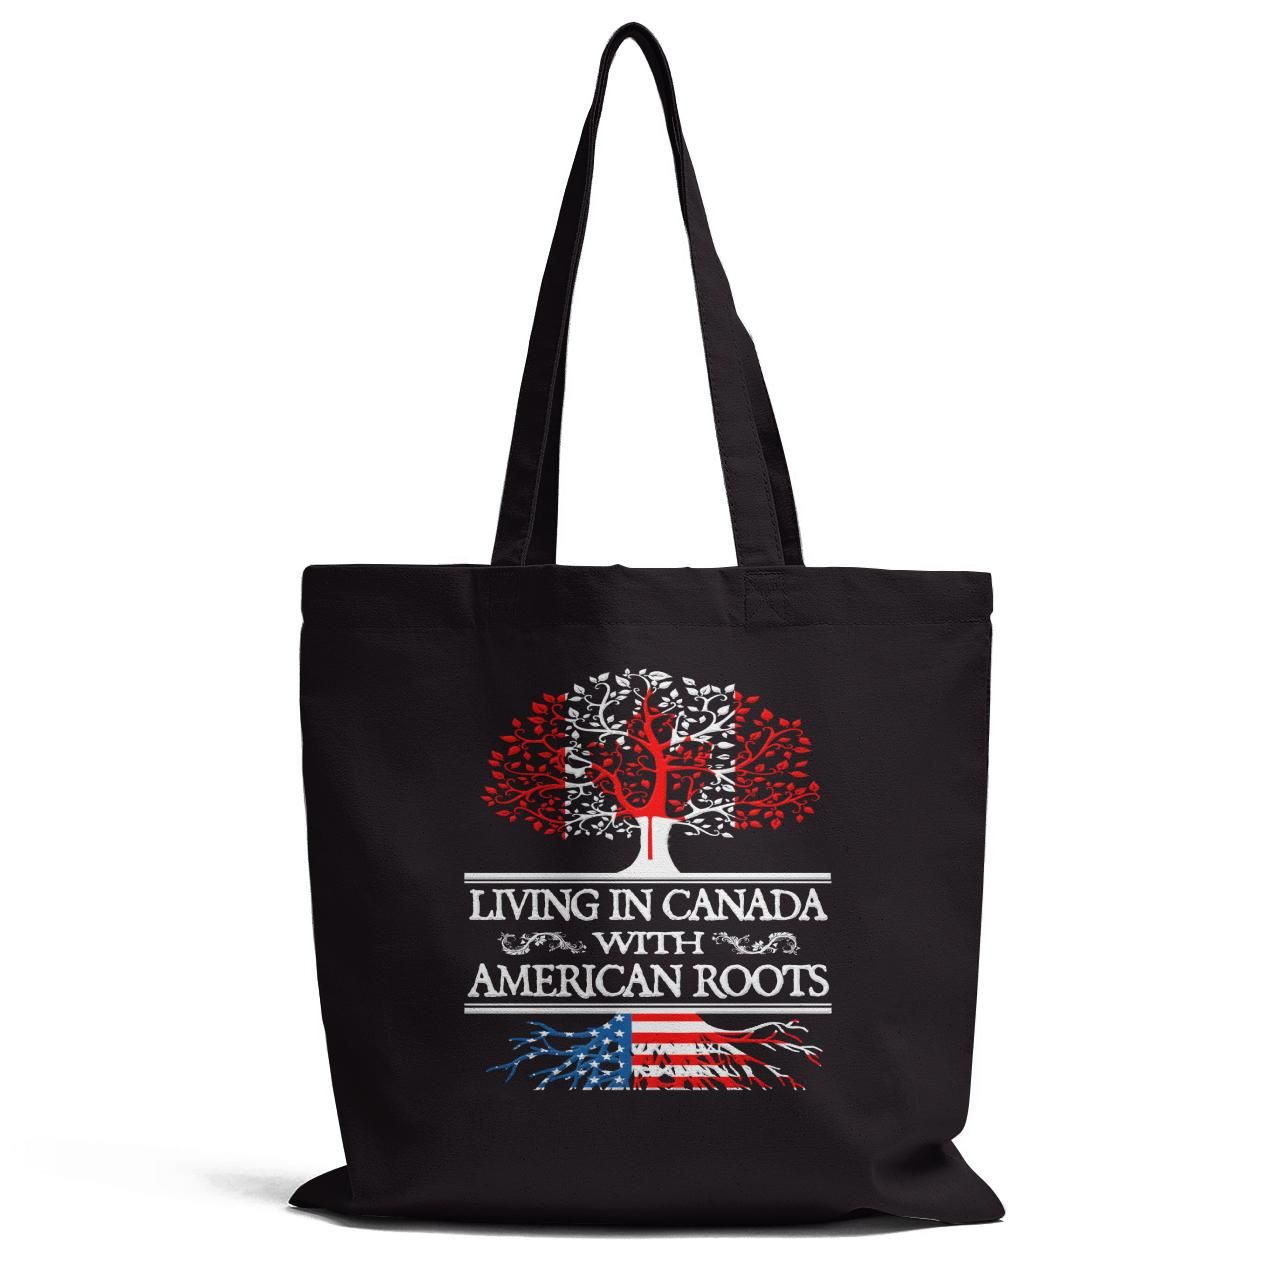 Living In Canada With American Roots Tote Bag